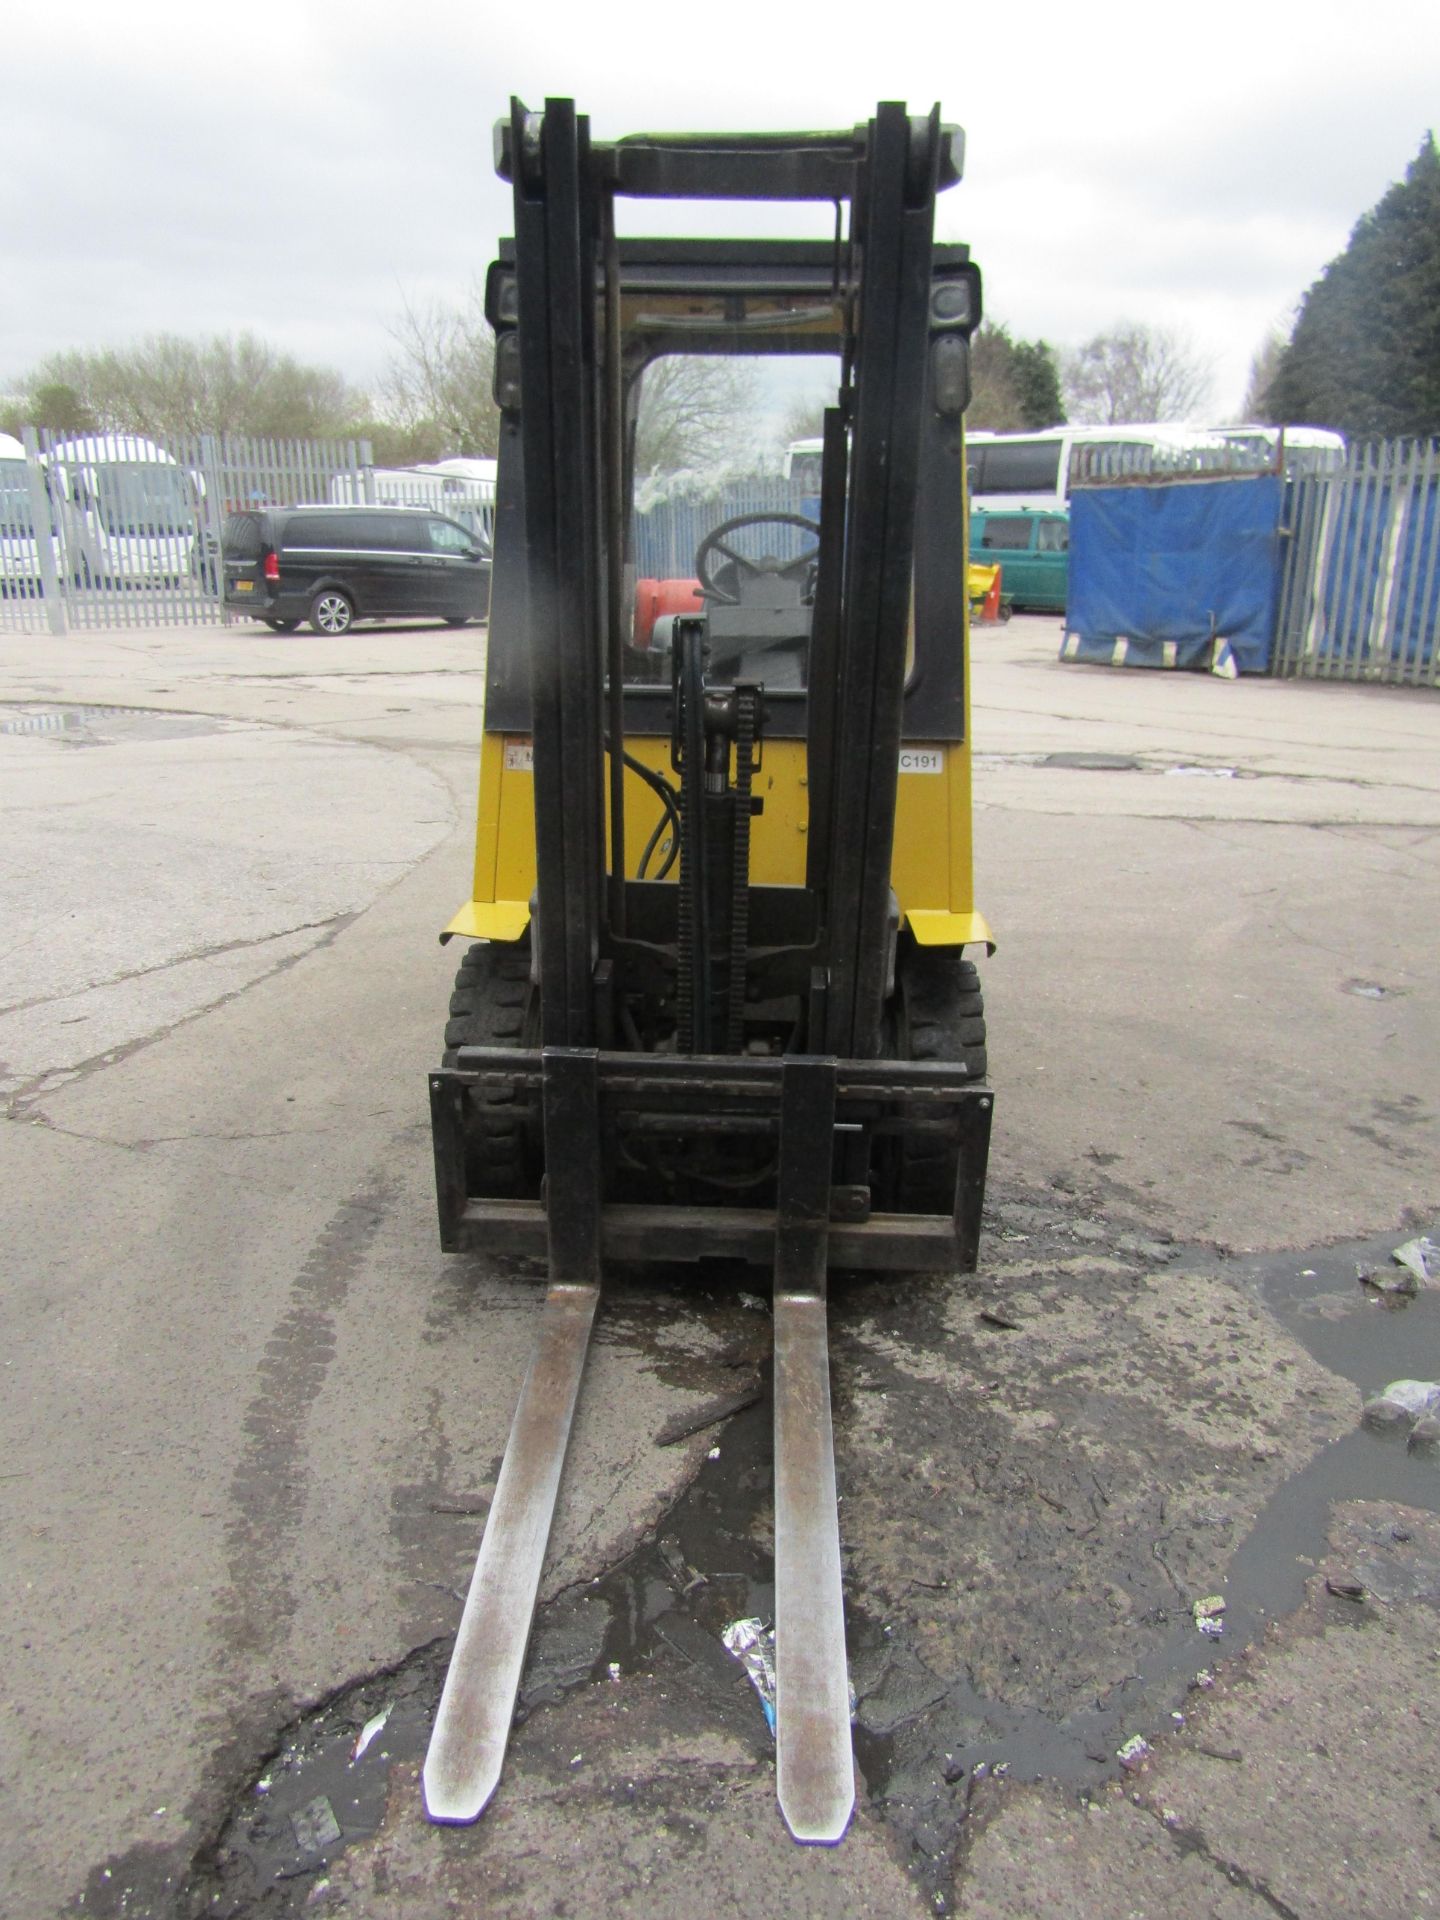 Hyster H2.00Xm Forklift Truck 7235 hours currently manufactured in 2004, has a roof as well as front